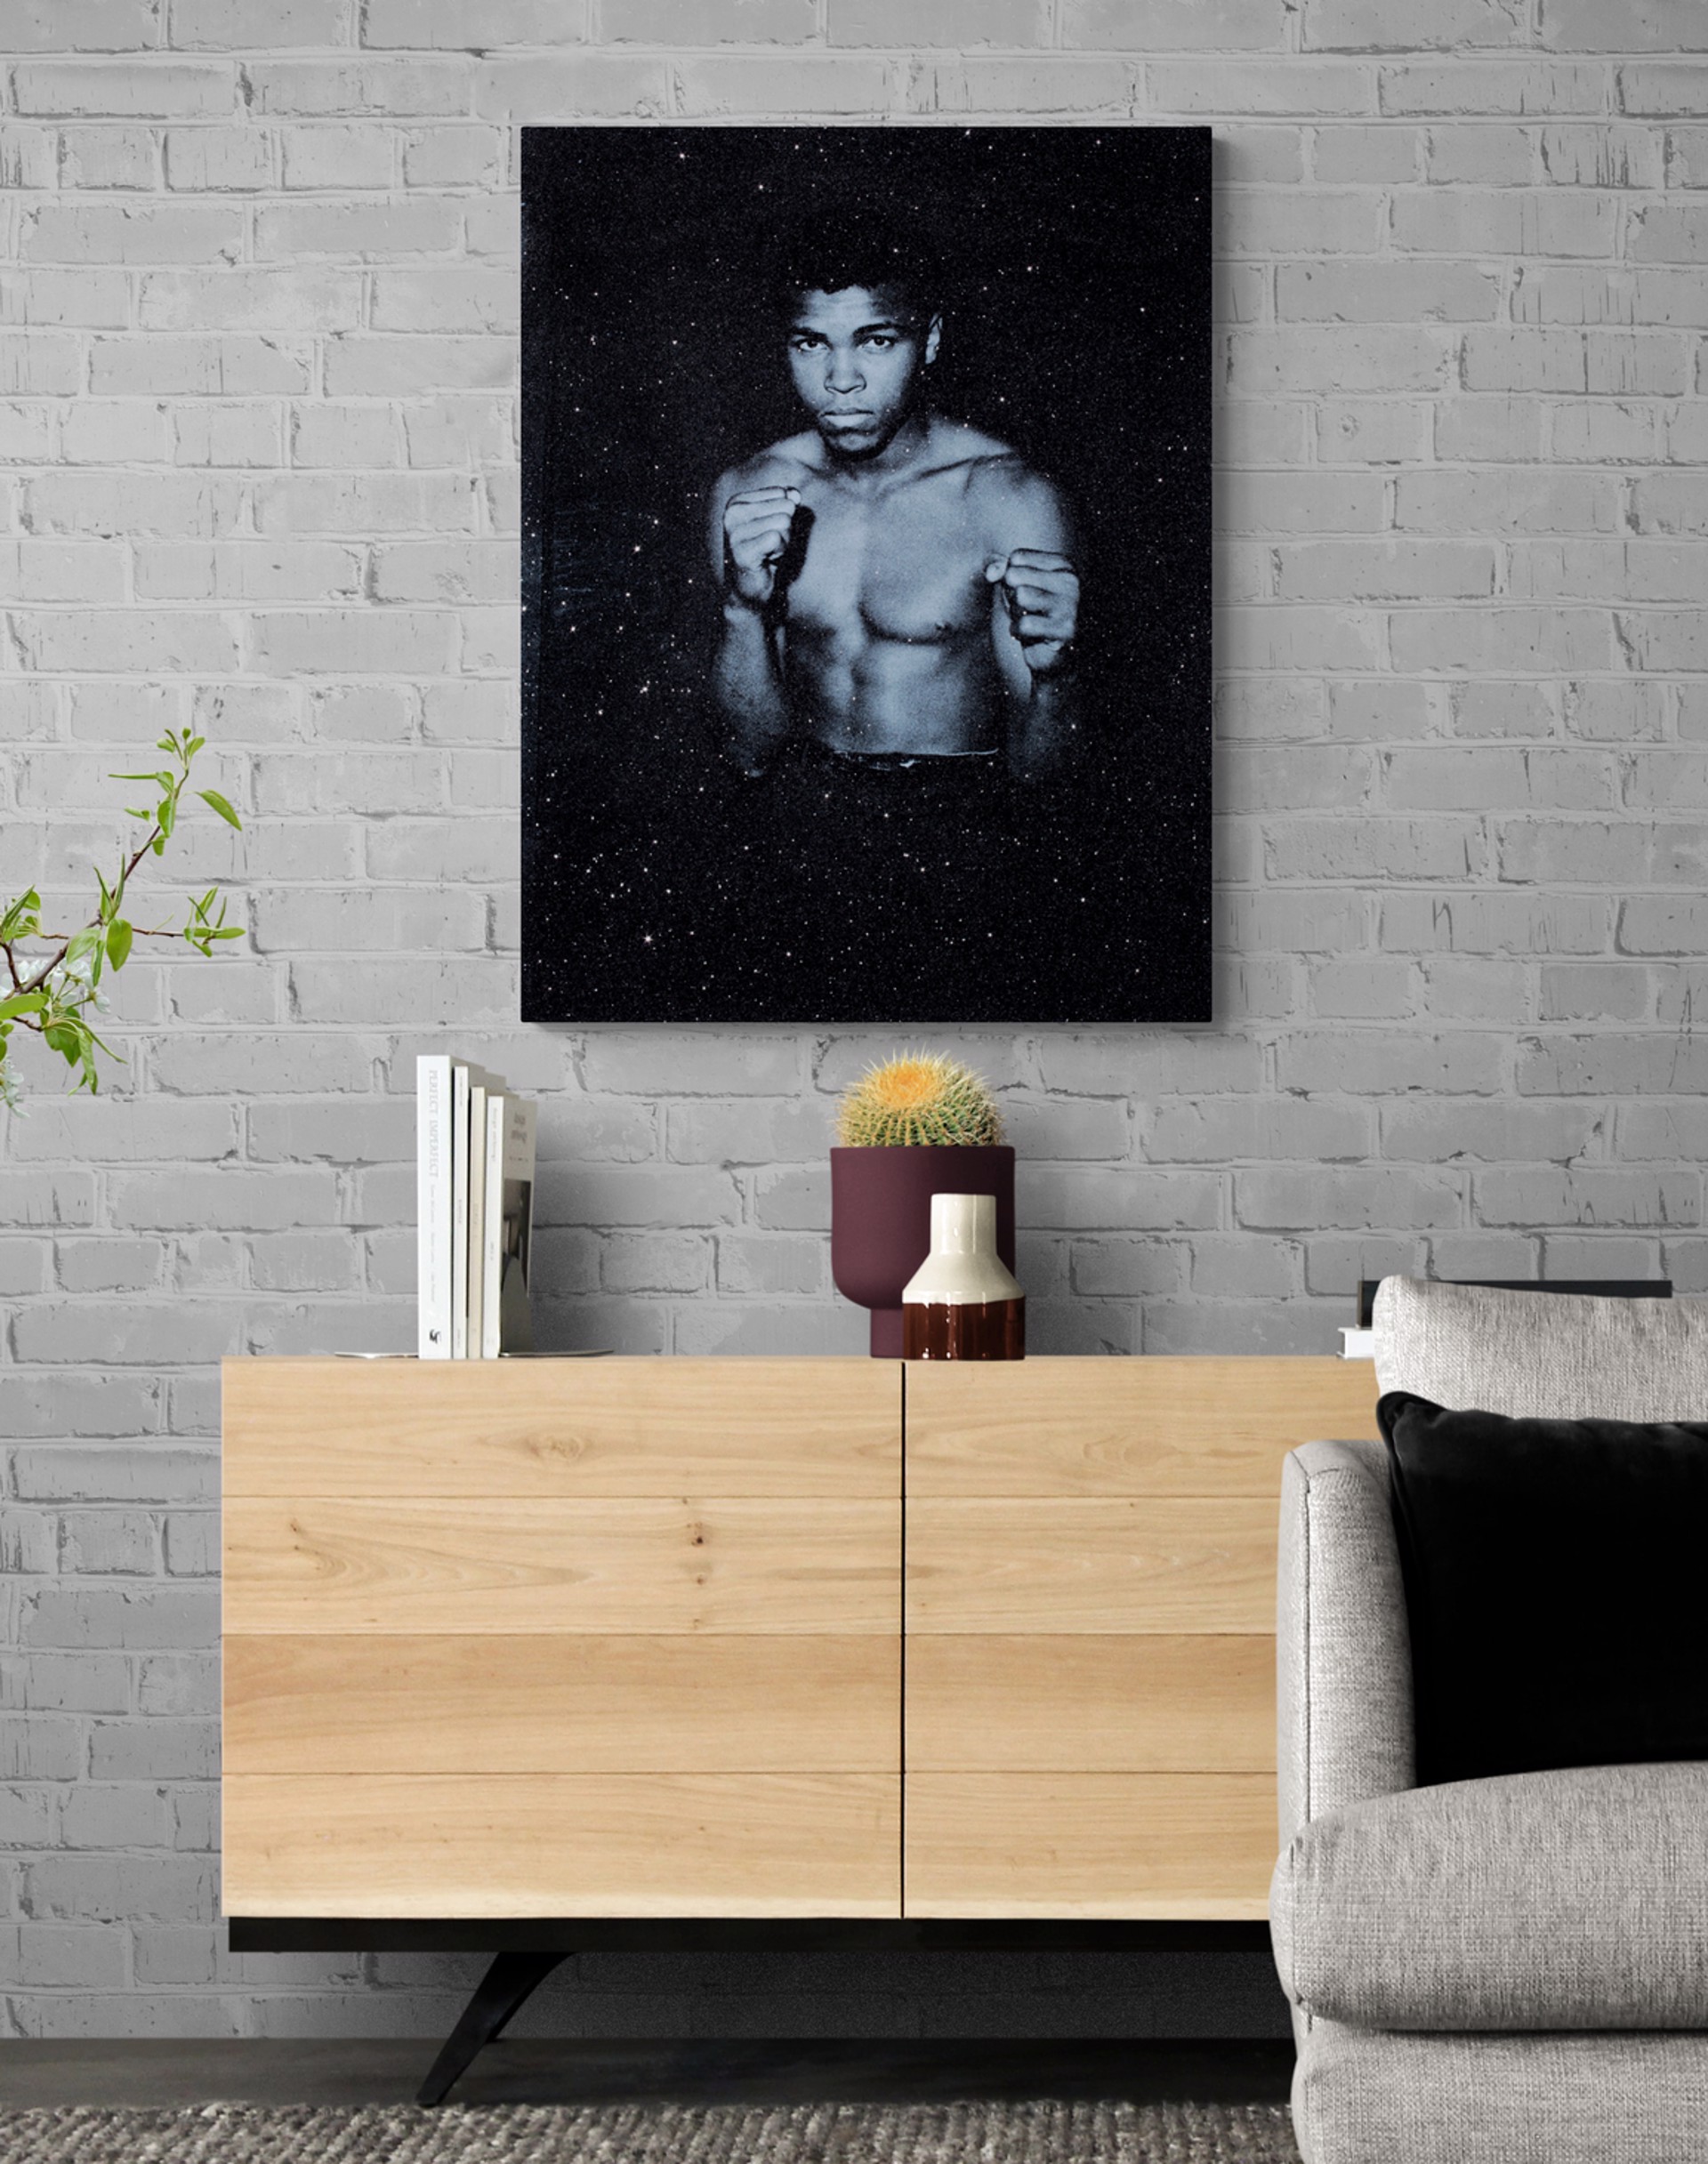 Muhammad Ali Blue Velvet by Russell Young